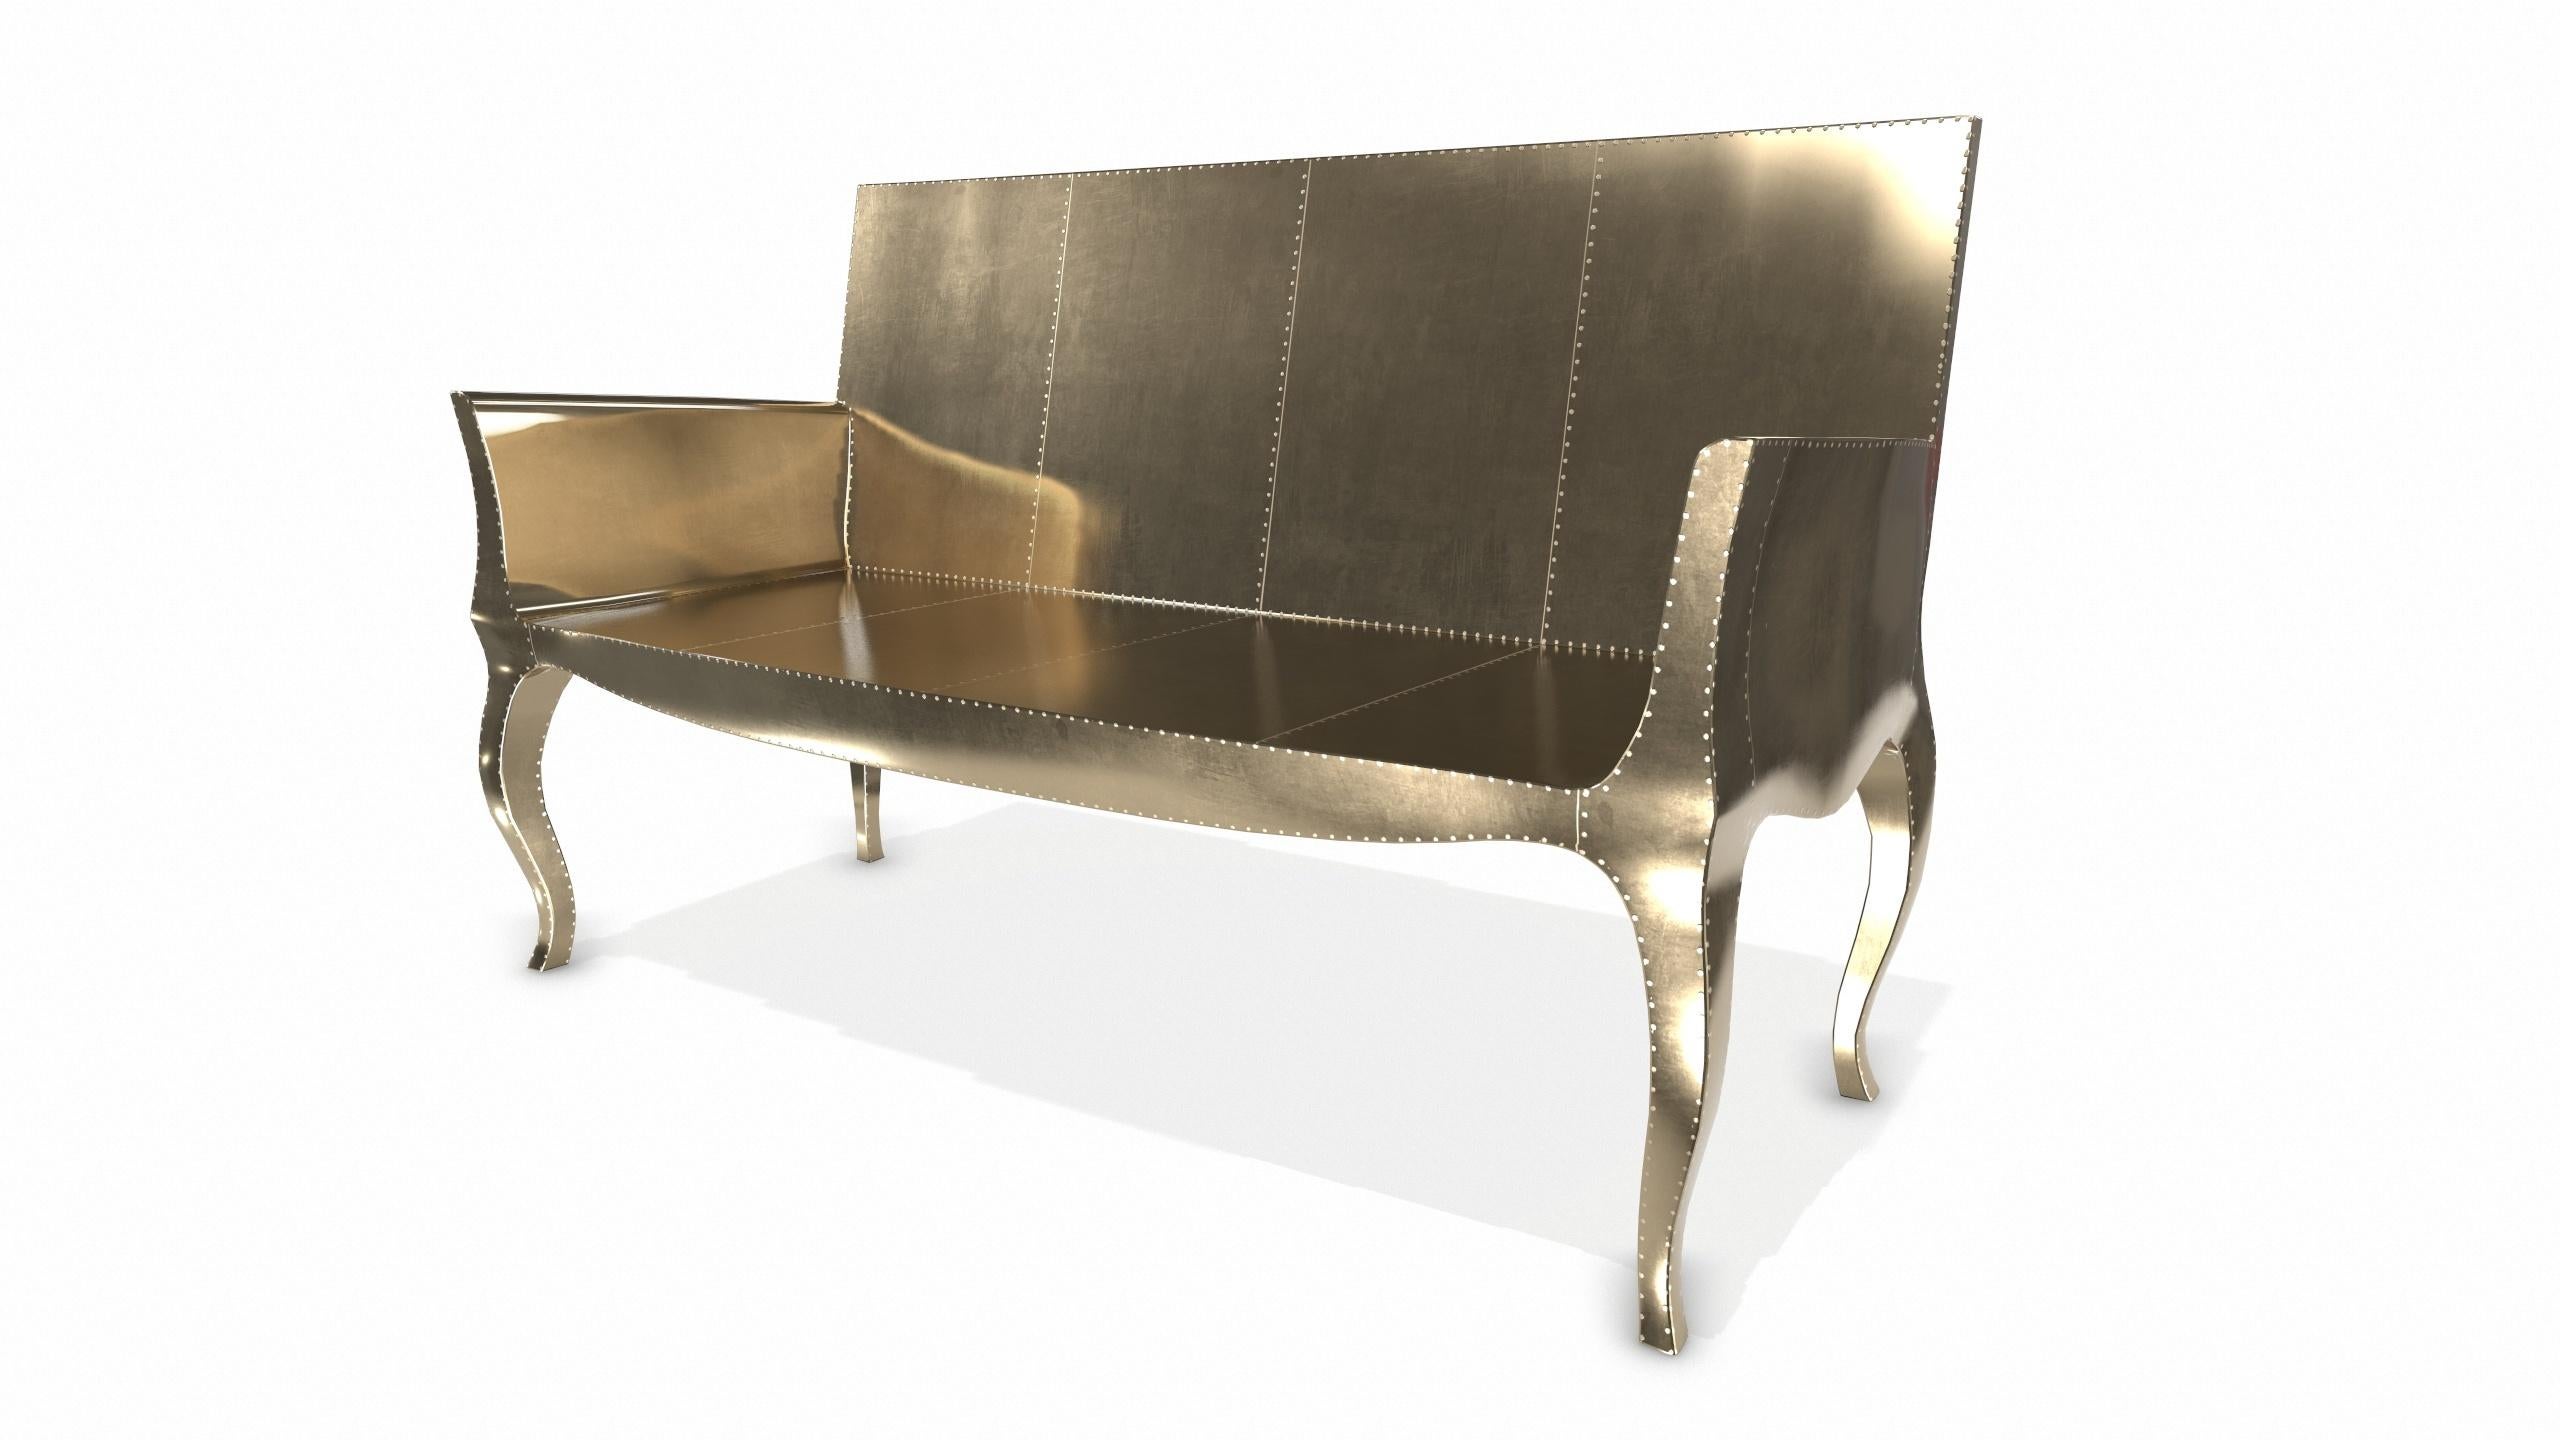 American Louise Settee Art Deco Settees in Smooth Brass by Paul Mathieu for S Odegard For Sale